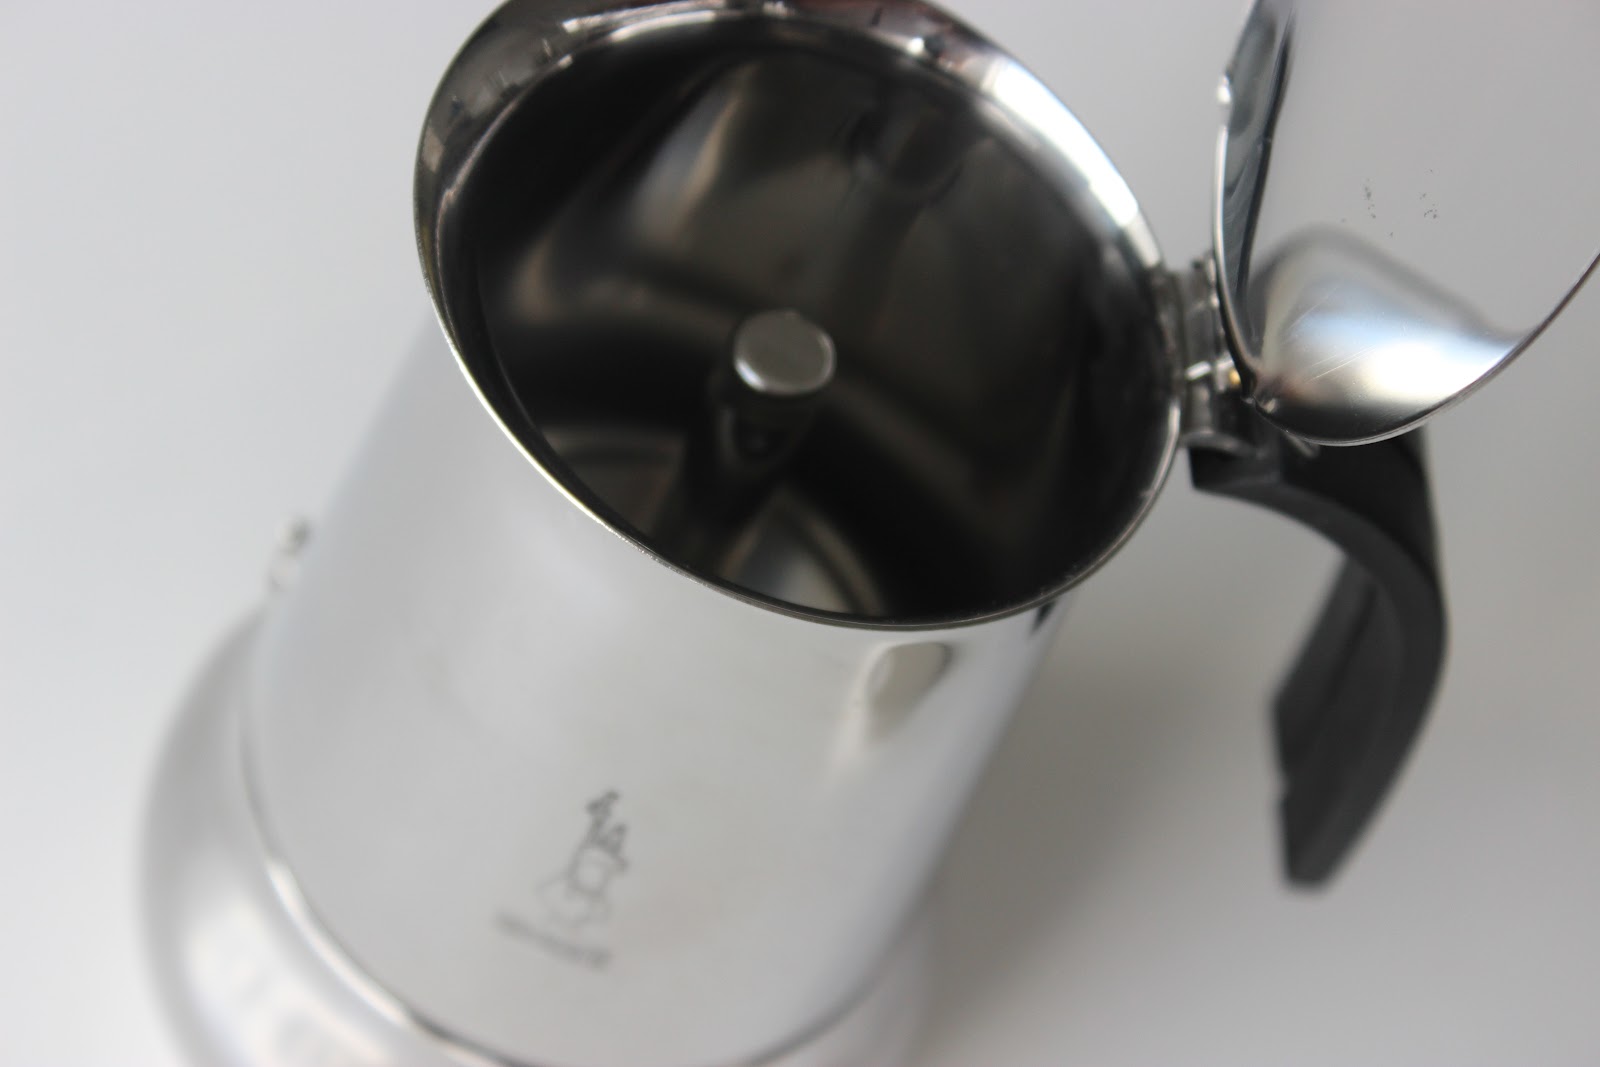 A really big bialetti (9 cups?) made in Italy, basically unused